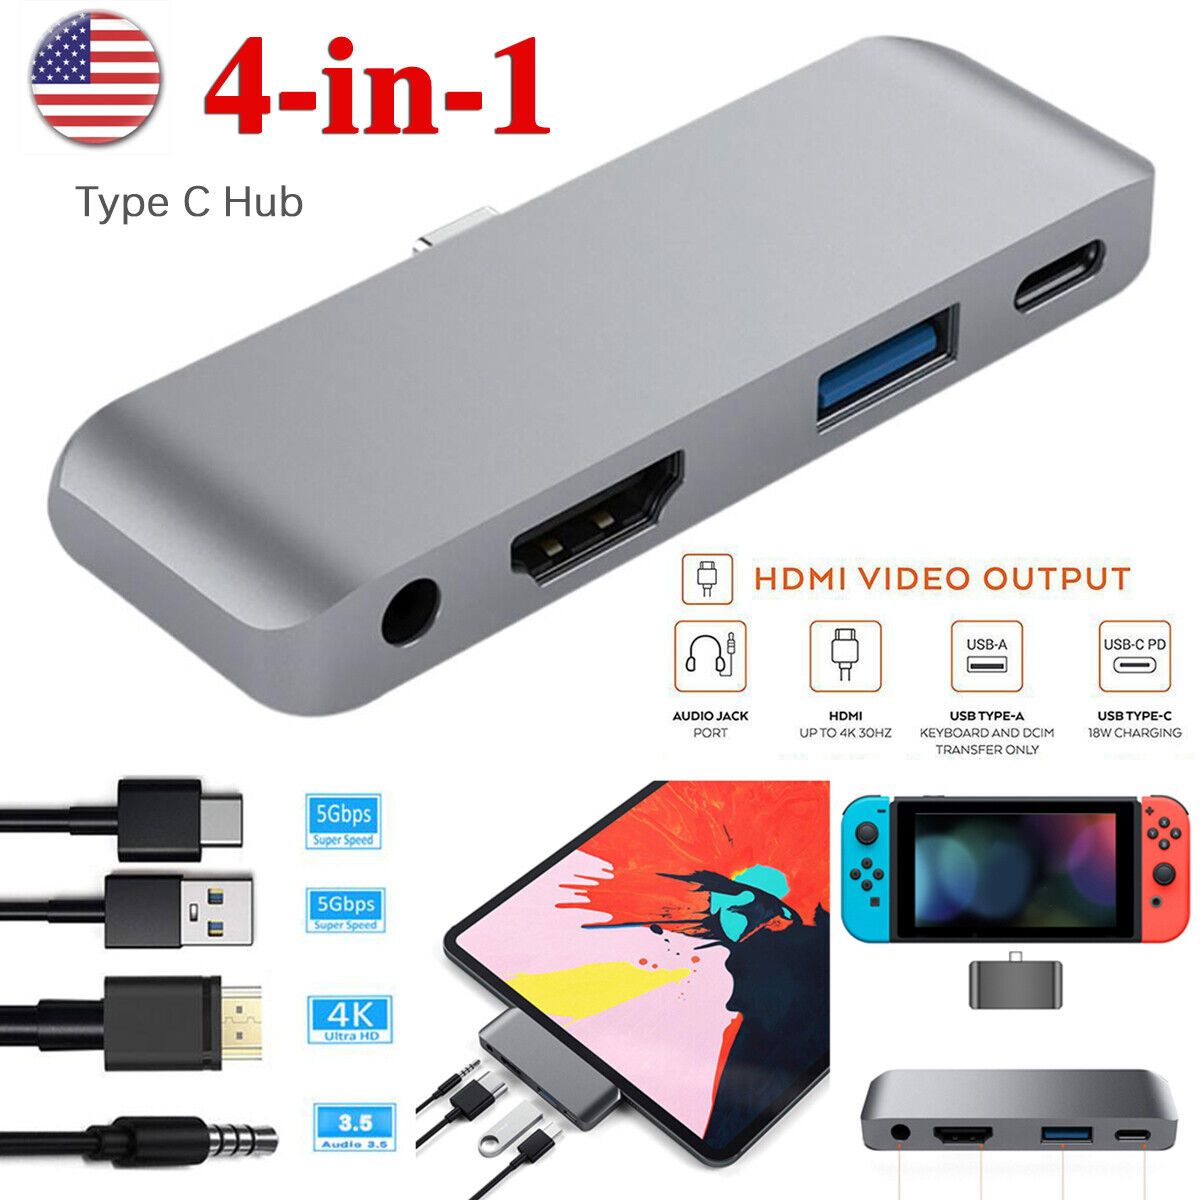 4 in 1 USB3.0 Type-C Hub to HDMI 4K Adapter Charging Dongle for iPad Pro 11/12.9